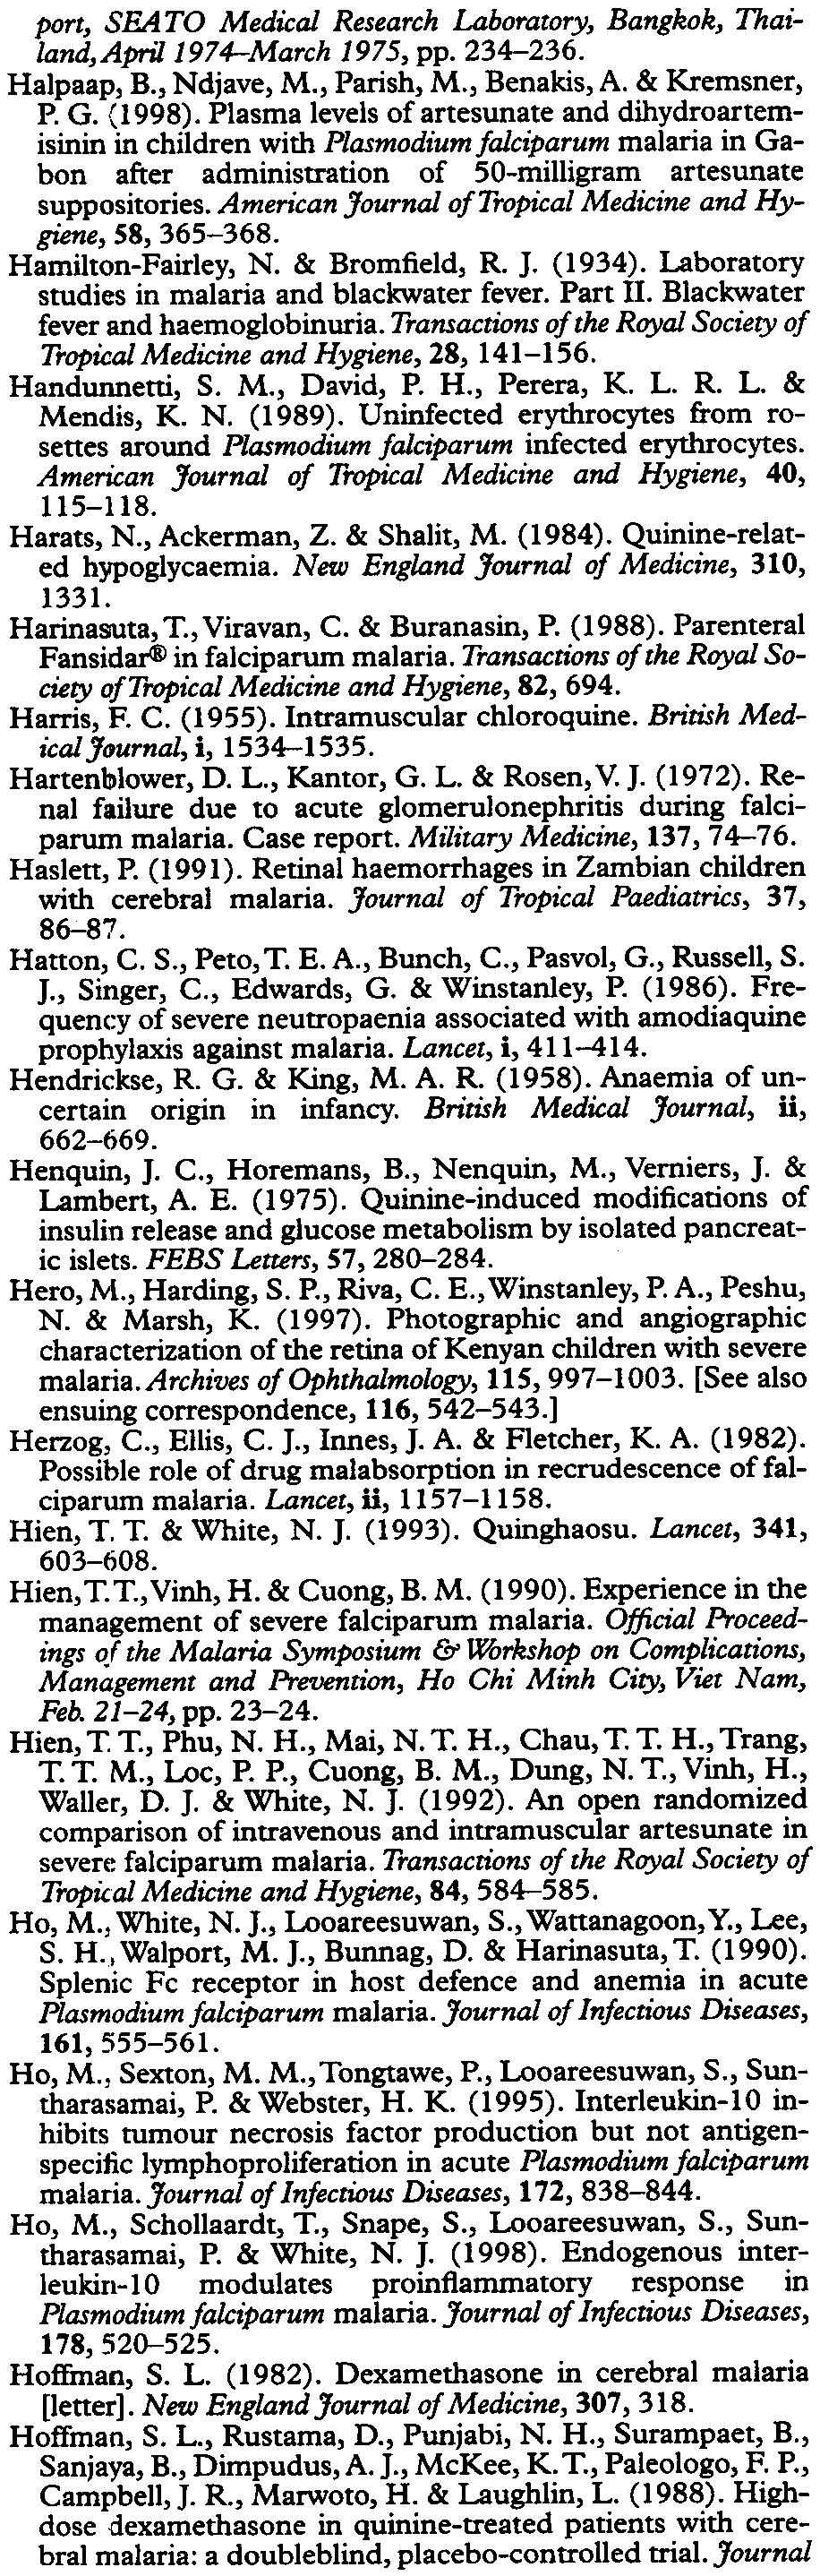 TRANSACTIONS OFTHE ROYAL SOCIE1Y OF TROPICAL MEDICINE AND HYGIENE (2000) 94, SUPPLEMENT Sln9 port, SEATO Medical Research Laboratory, Bangkok, Thailand, April 1974-March 1975, pp. 234-236. Halpaap, B.